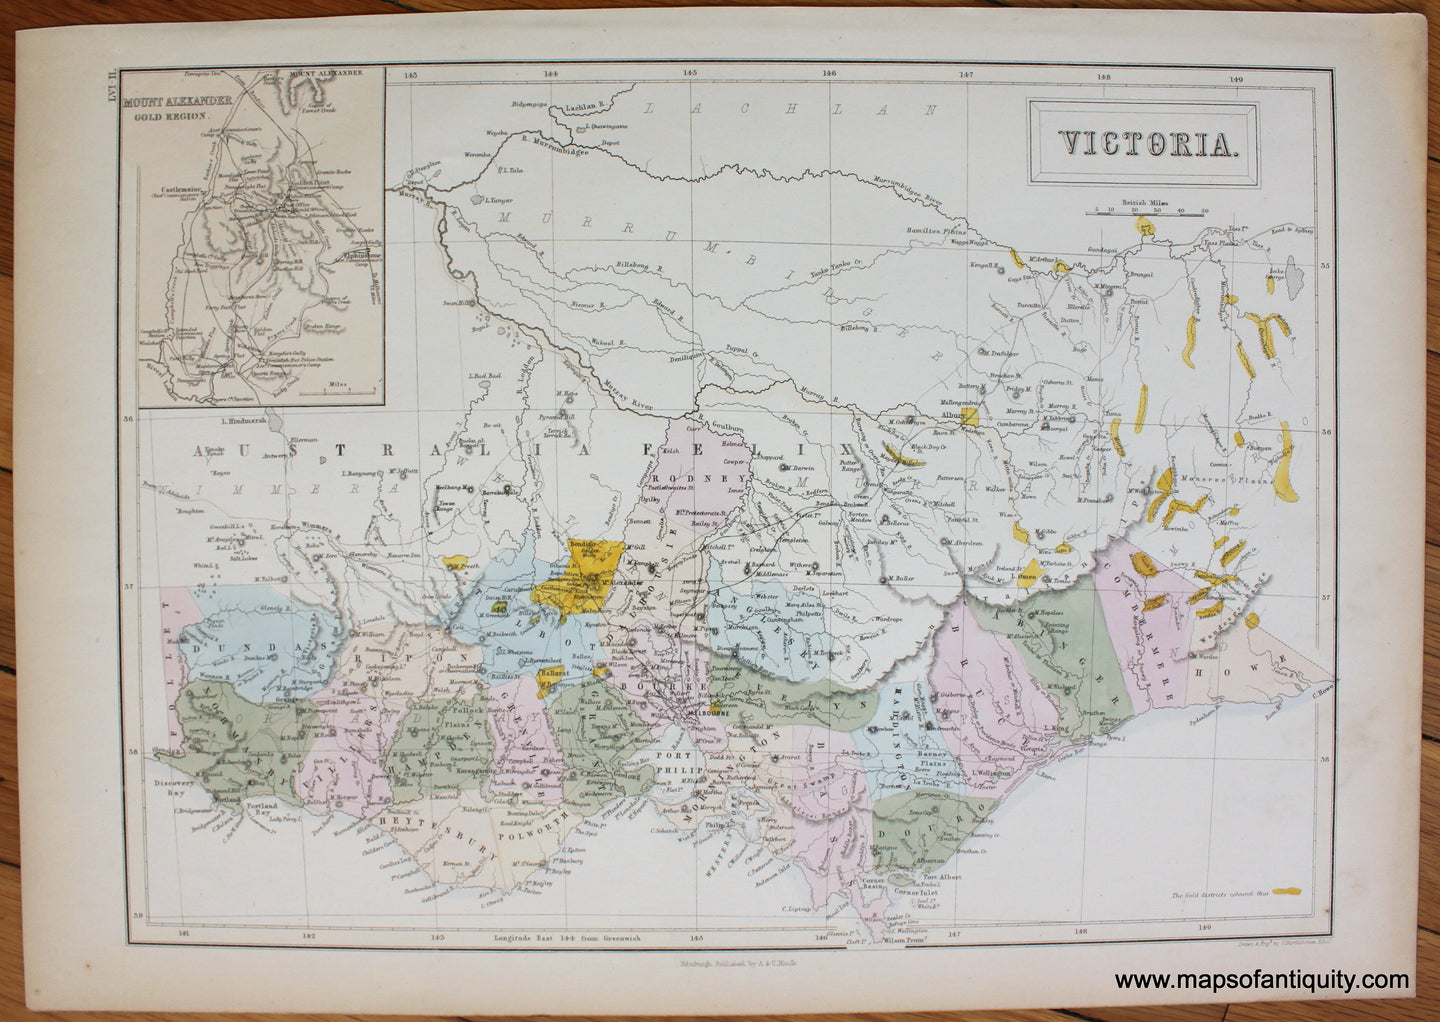 Antique-Hand-Colored-Map-Victoria-Australia-Gold-Districts-c.-1854-Black-1800s-19th-century-Maps-of-Antiquity